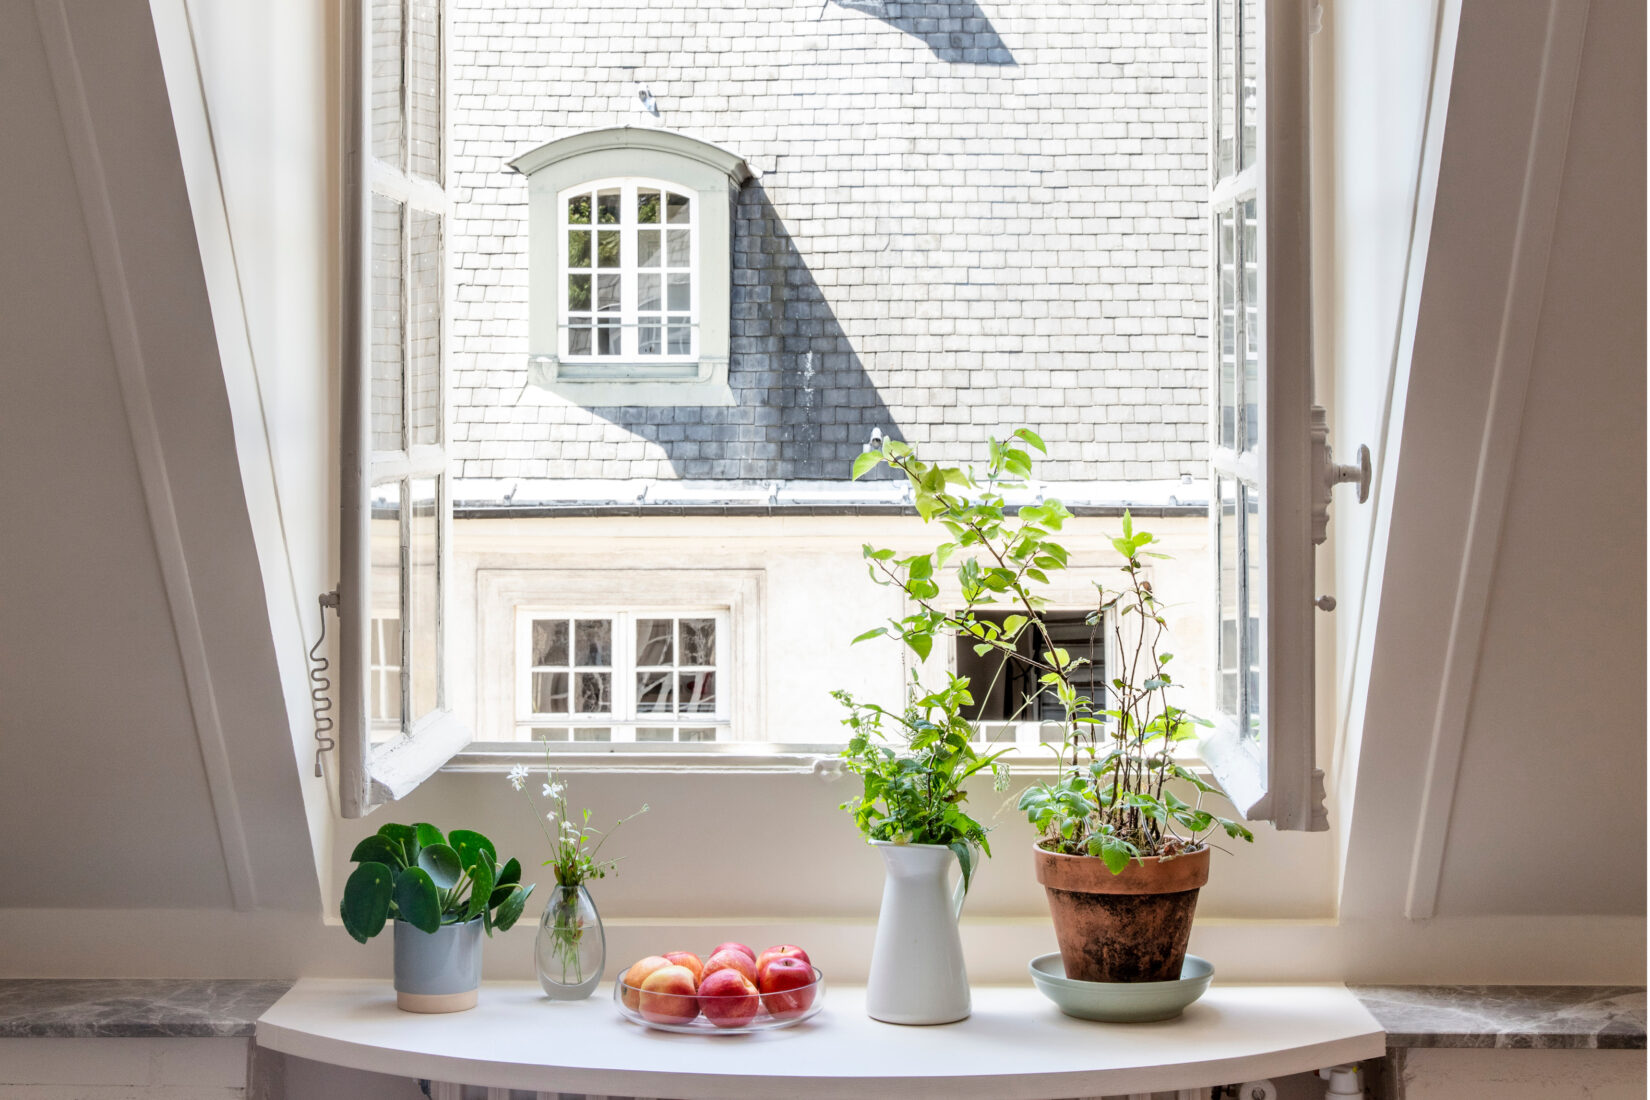 In one of the residency appartments of Institut suédois, a window framed with plants opened to the courtyard.